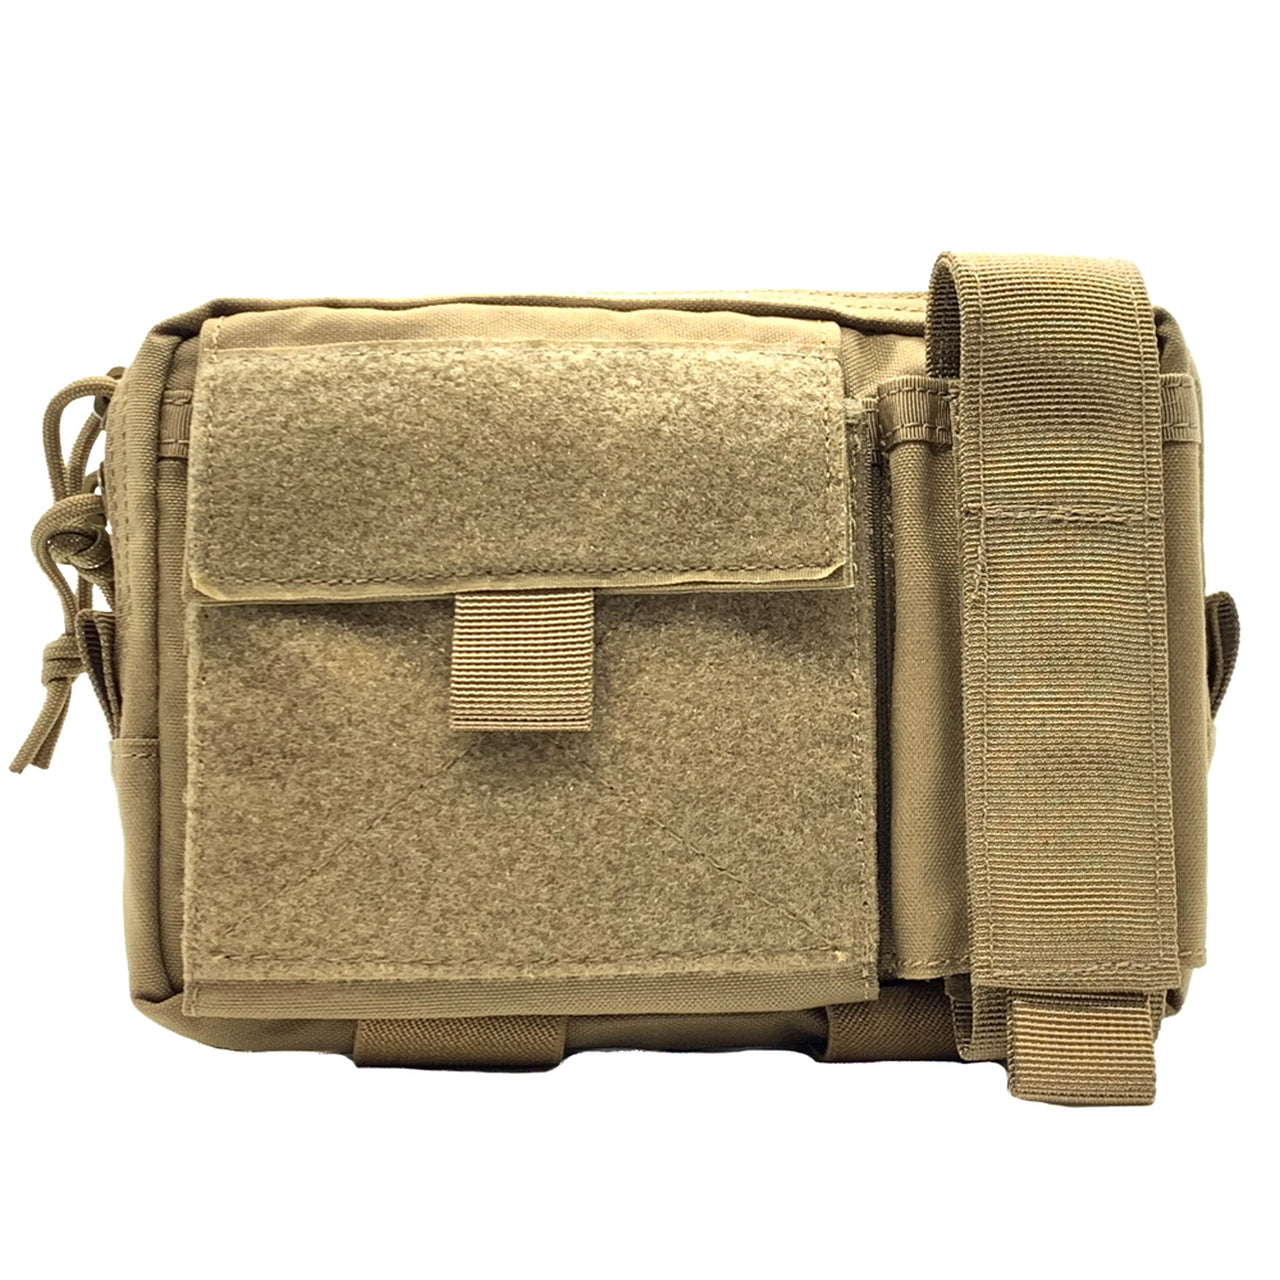 Shellback Tactical Super Admin Pouch by Shellback Tactical.